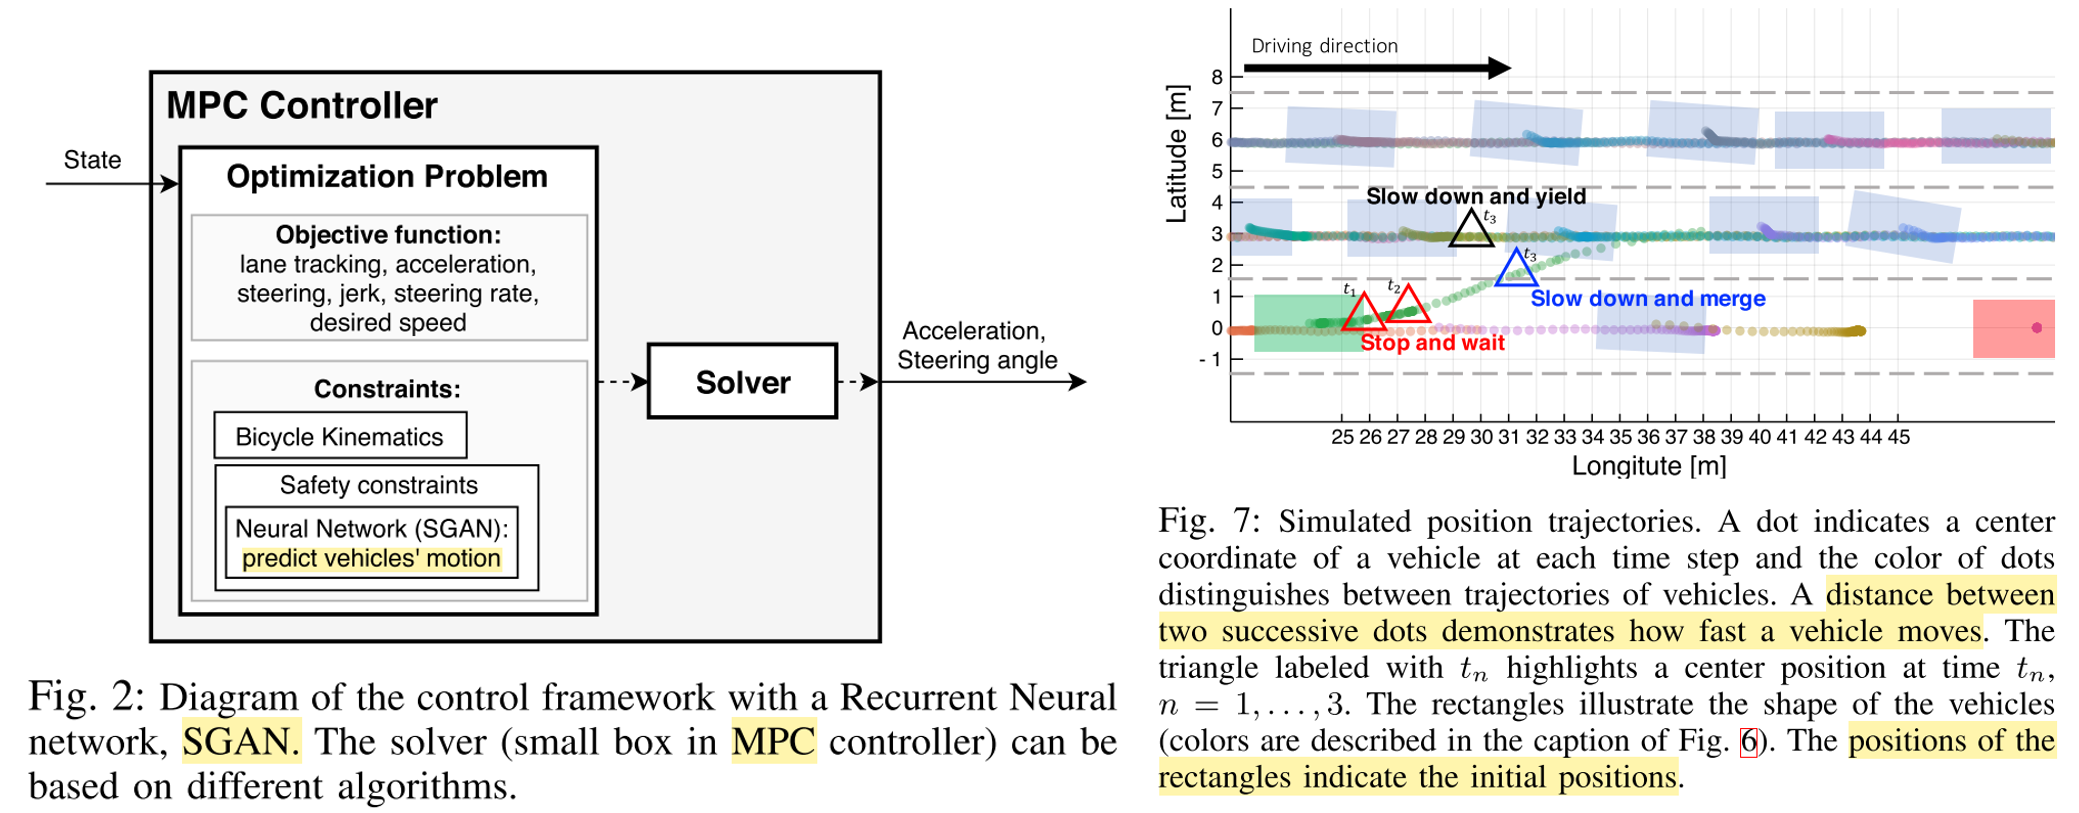 In another work, the authors try to incorporate an RNN as a prediction model into an MPC controller, leading to a reliable, interpretable, and tunable framework which also contains a data-driven model that captures interactive motions between drivers. Source.